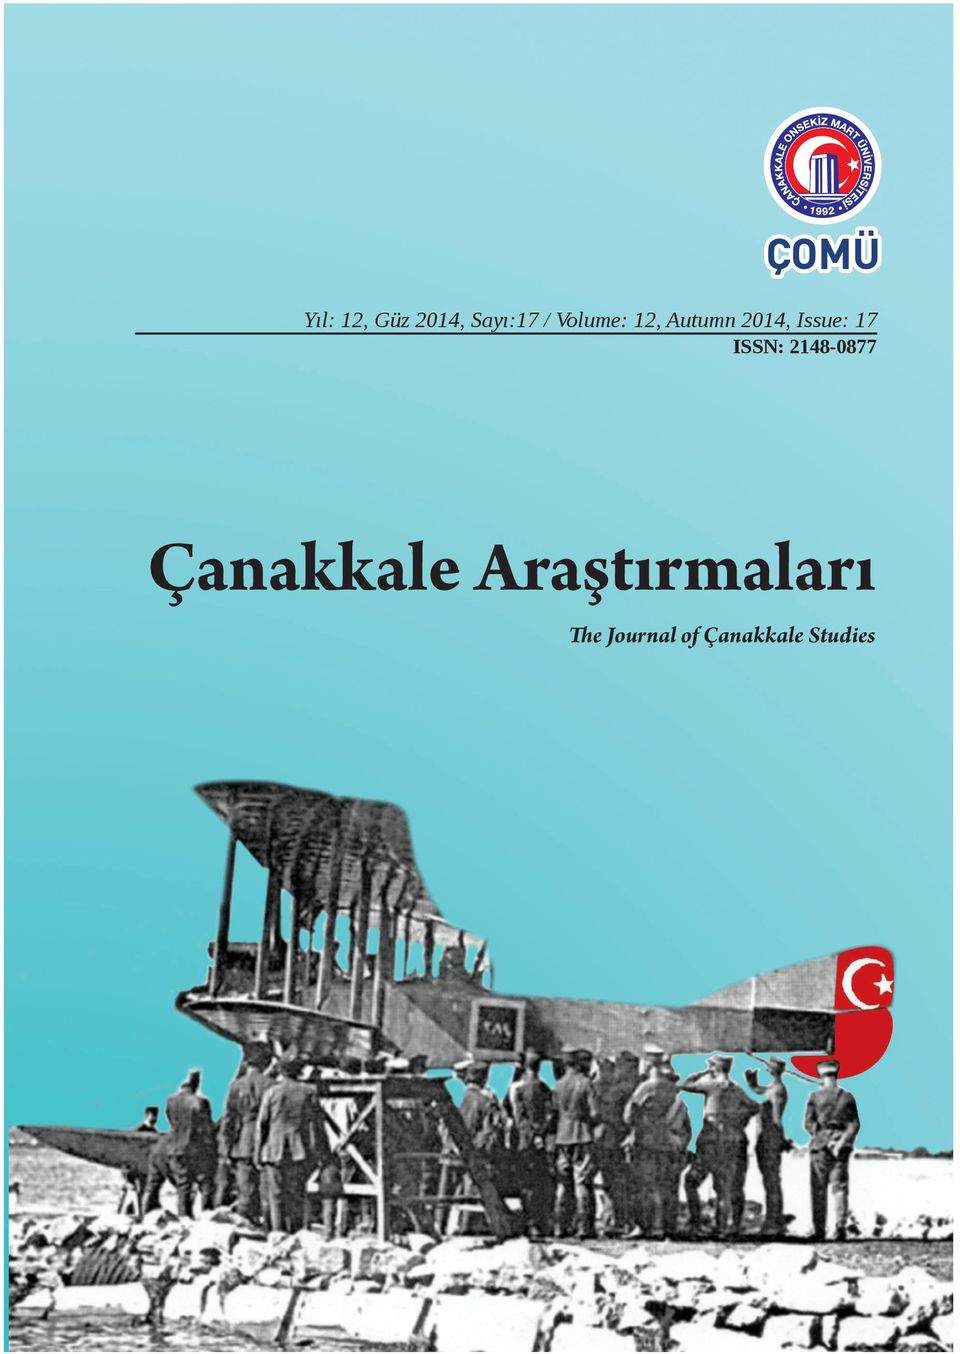 Letters, Memoirs and Diaries as Literary Genres: Motivational Aspects in Letters, Memoirs and Diaries of the Soldiers Who Fought at the Gallipoli Battle Ahmet Esenkaya Çanakkale Cephesi nde İdari